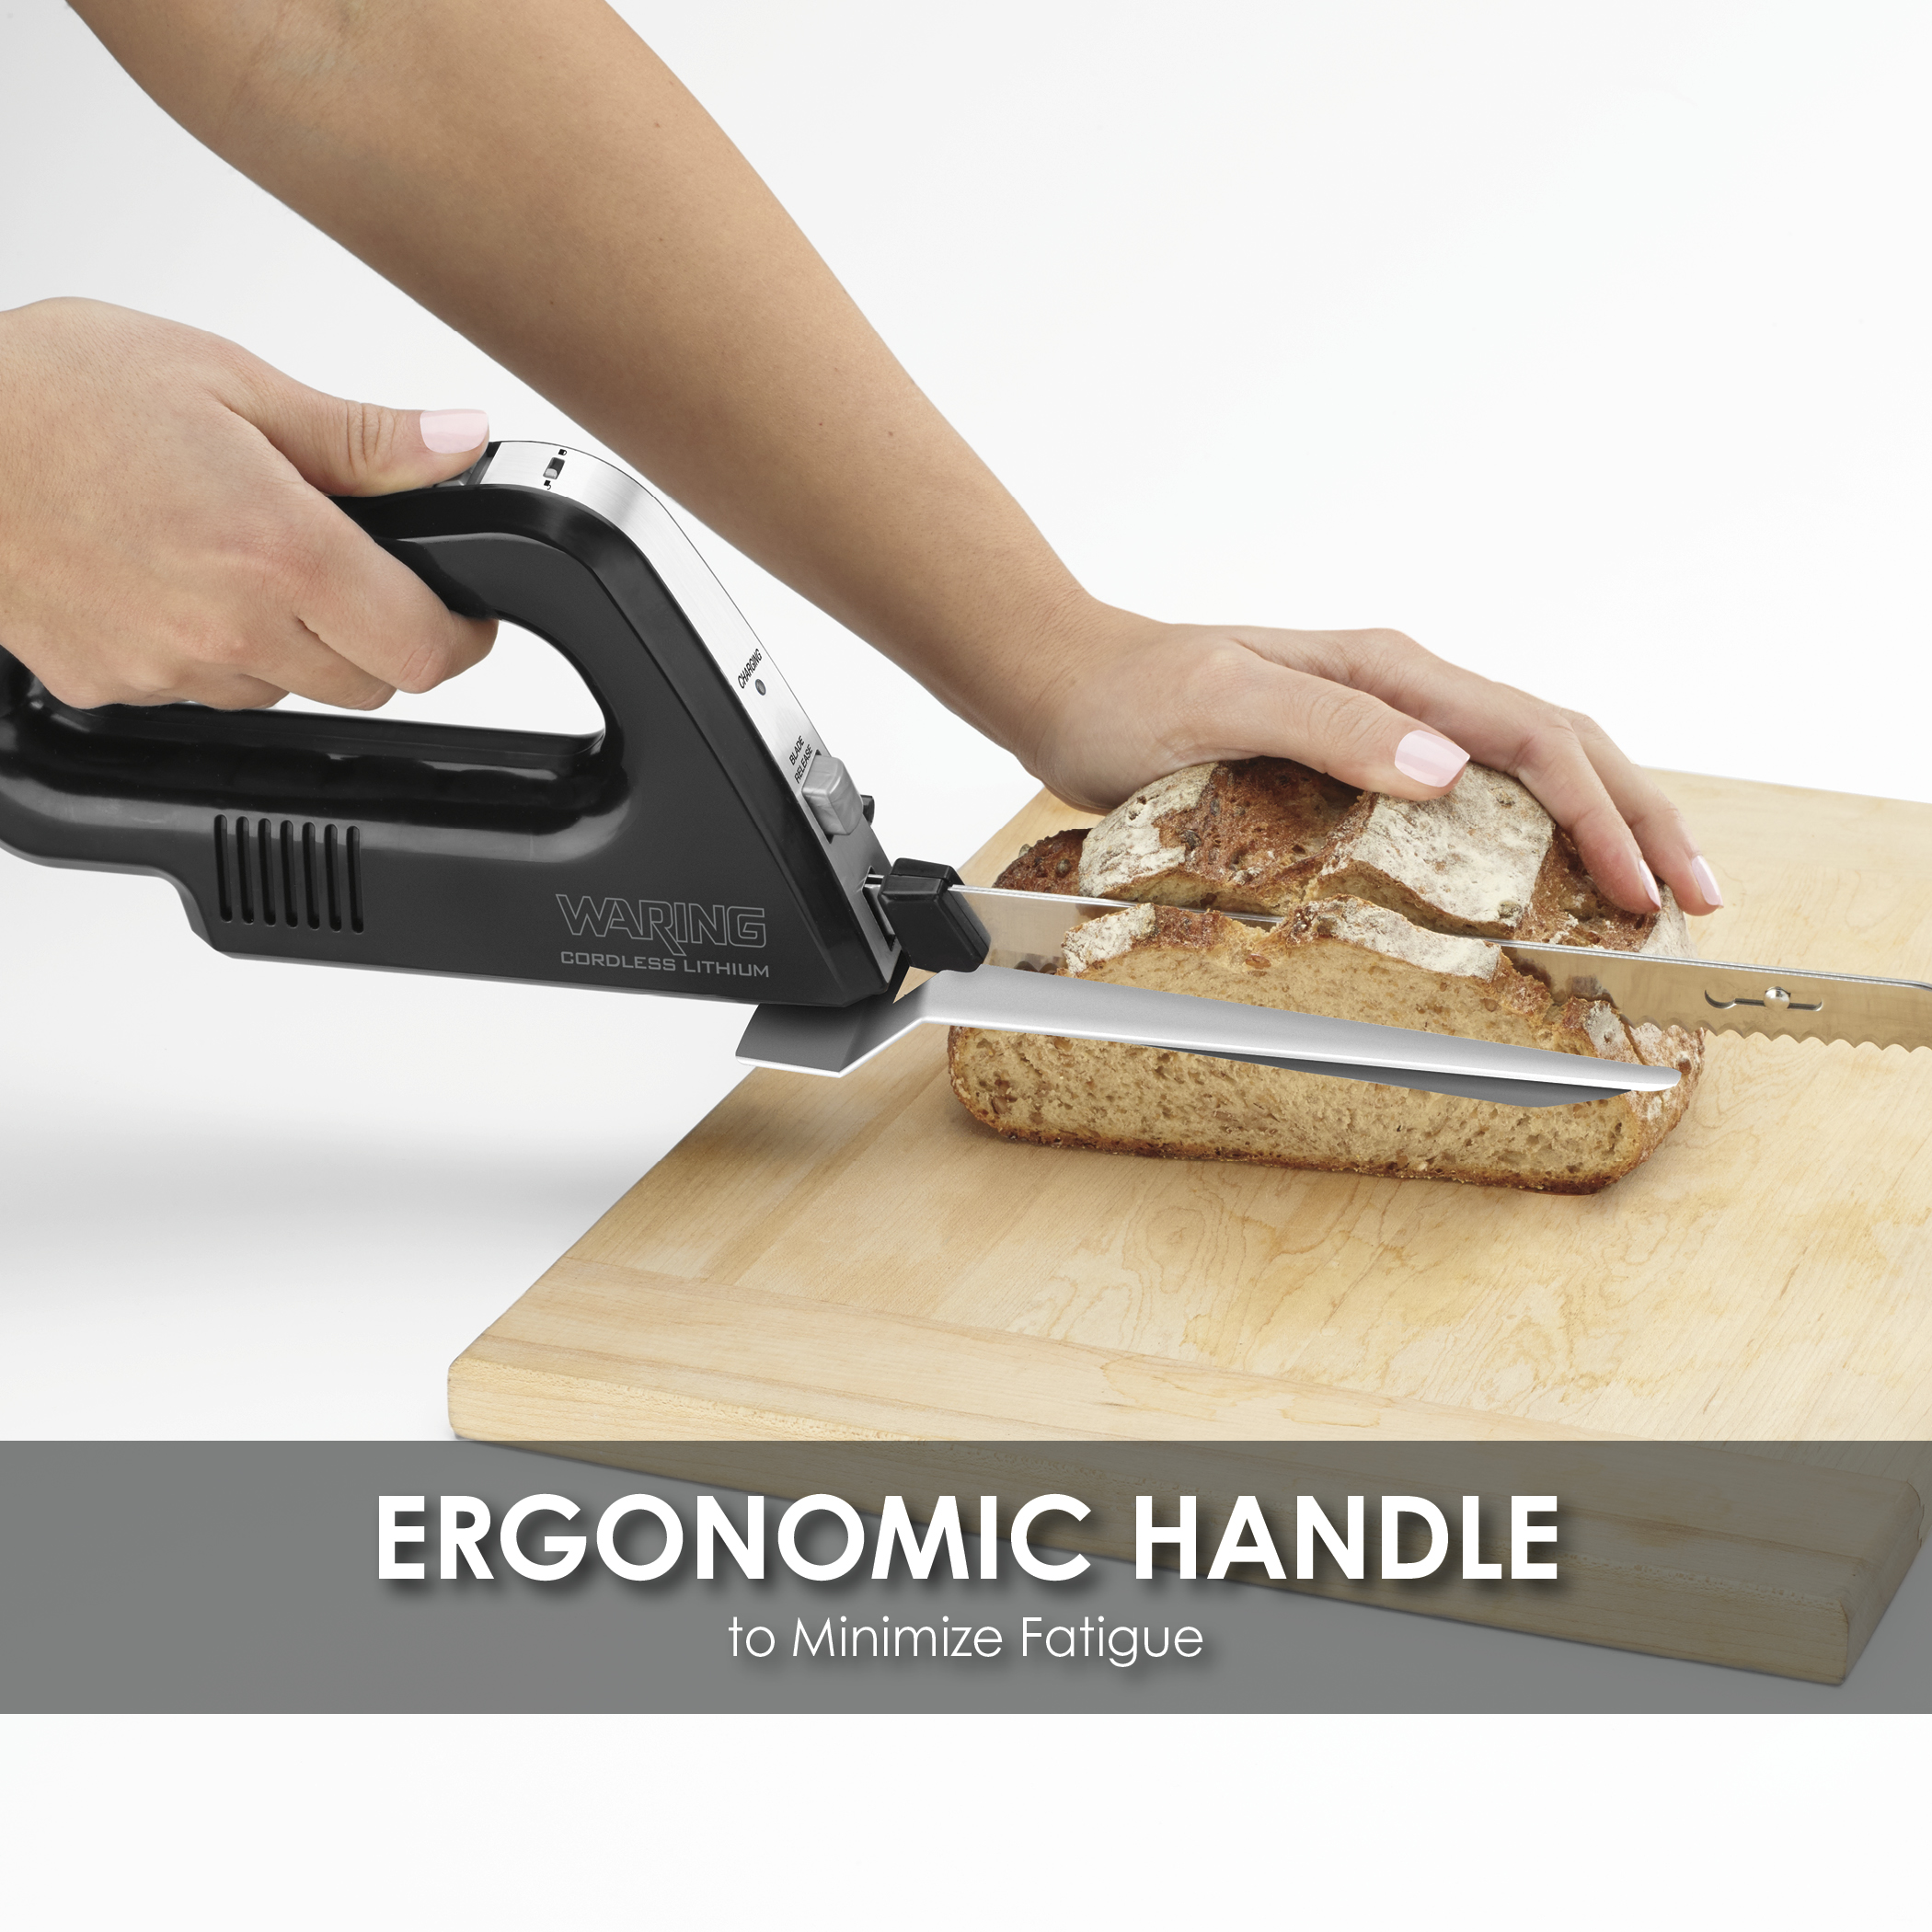 Electric Knives for sale in Longview, Washington